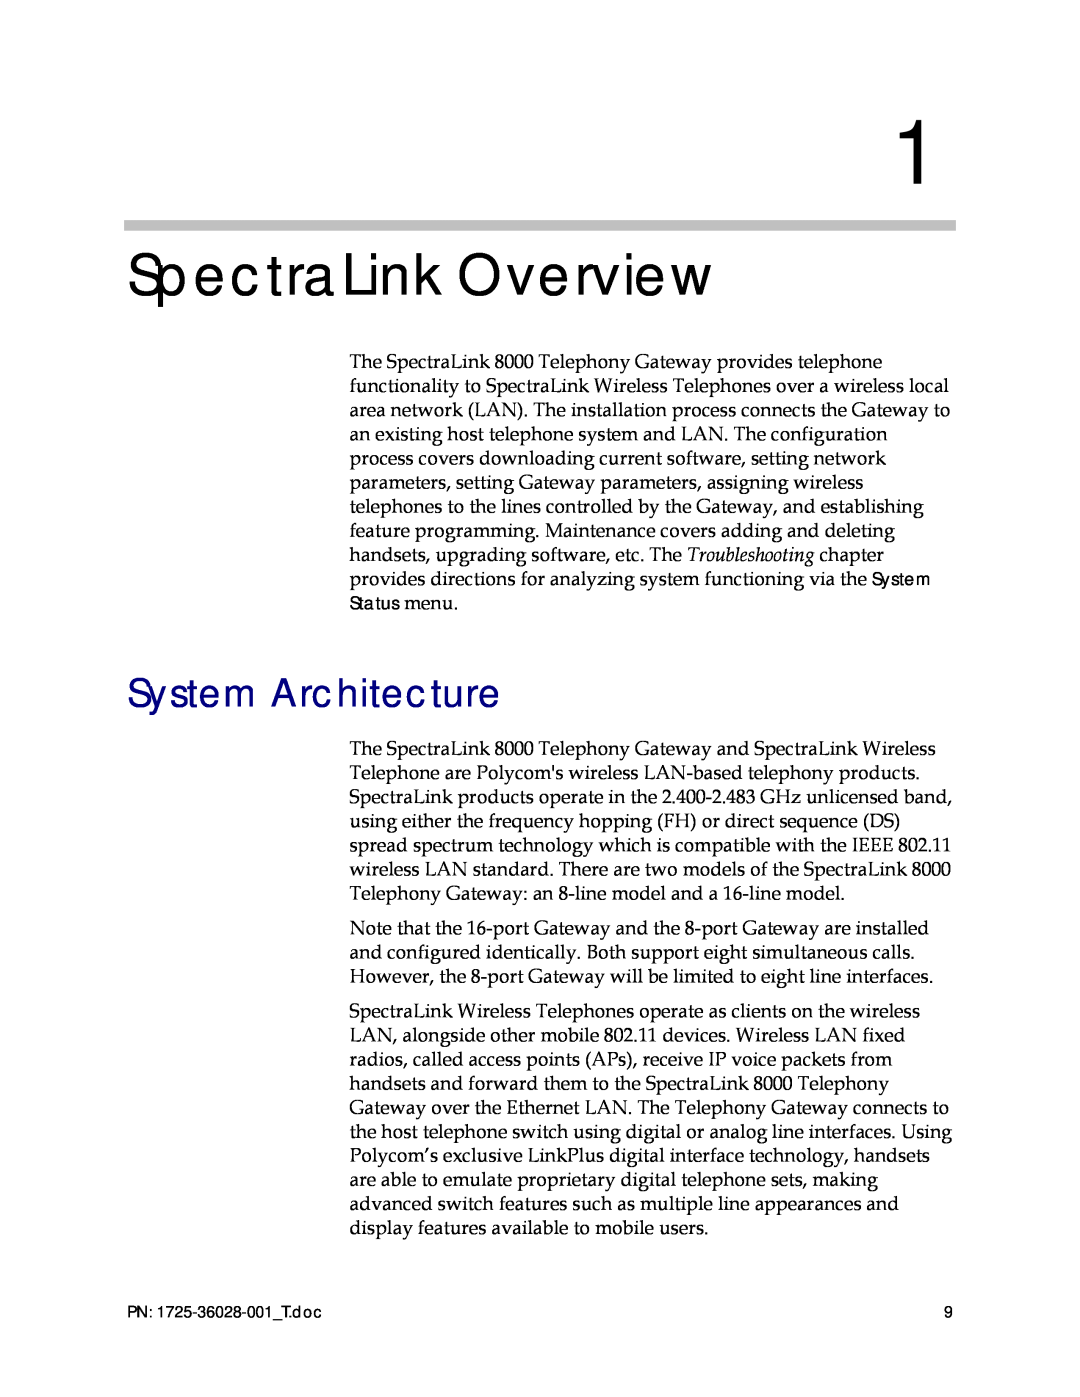 Polycom 1725-36028-001 manual SpectraLink Overview, System Architecture 